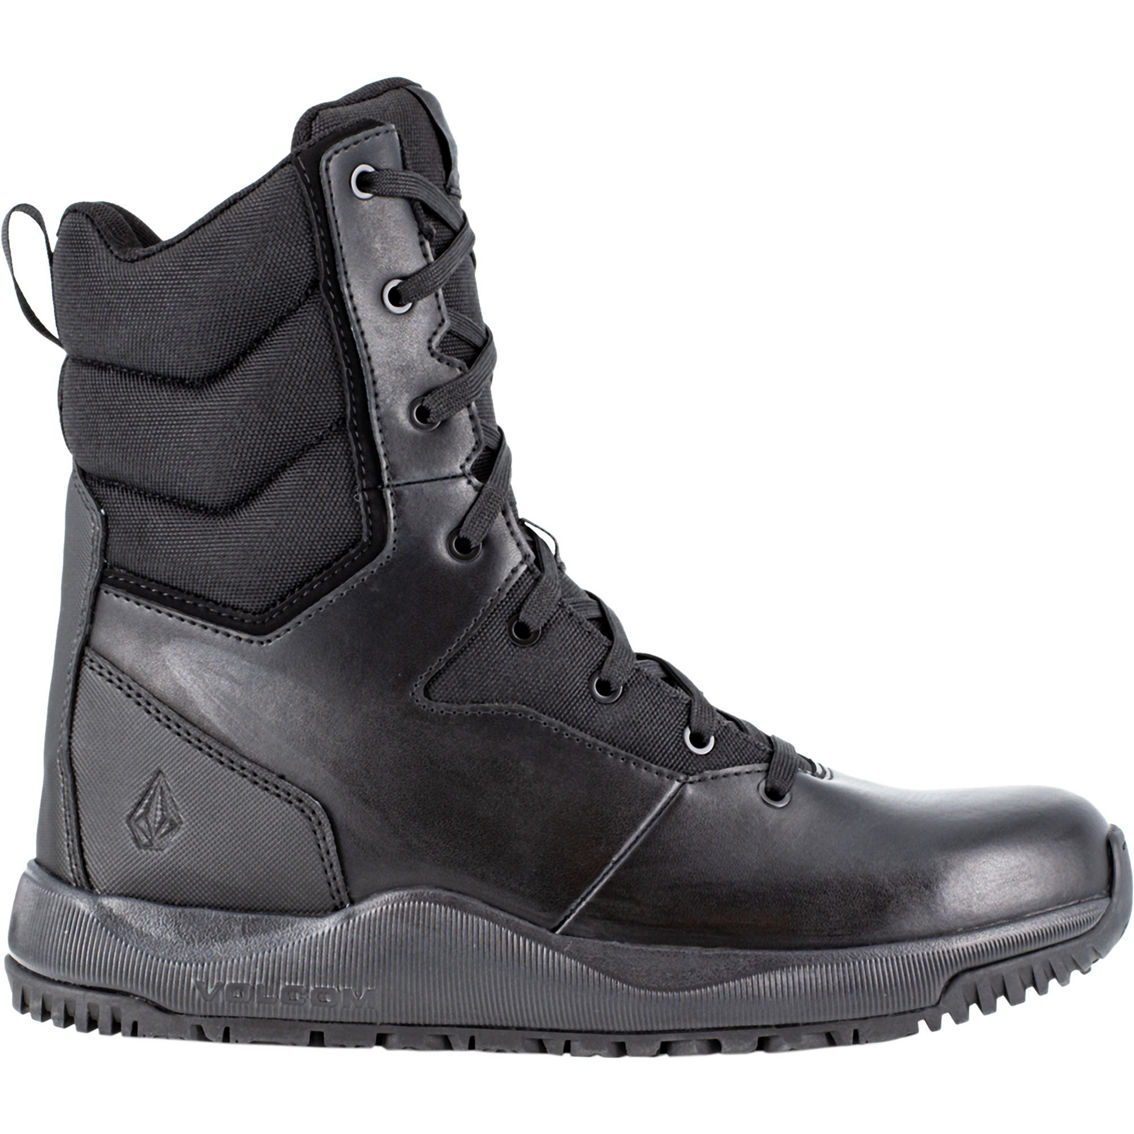 Volcom Street Shield VM30705 ASTM F2892 Electrical Hazard Protection Boots - Image 3 of 5